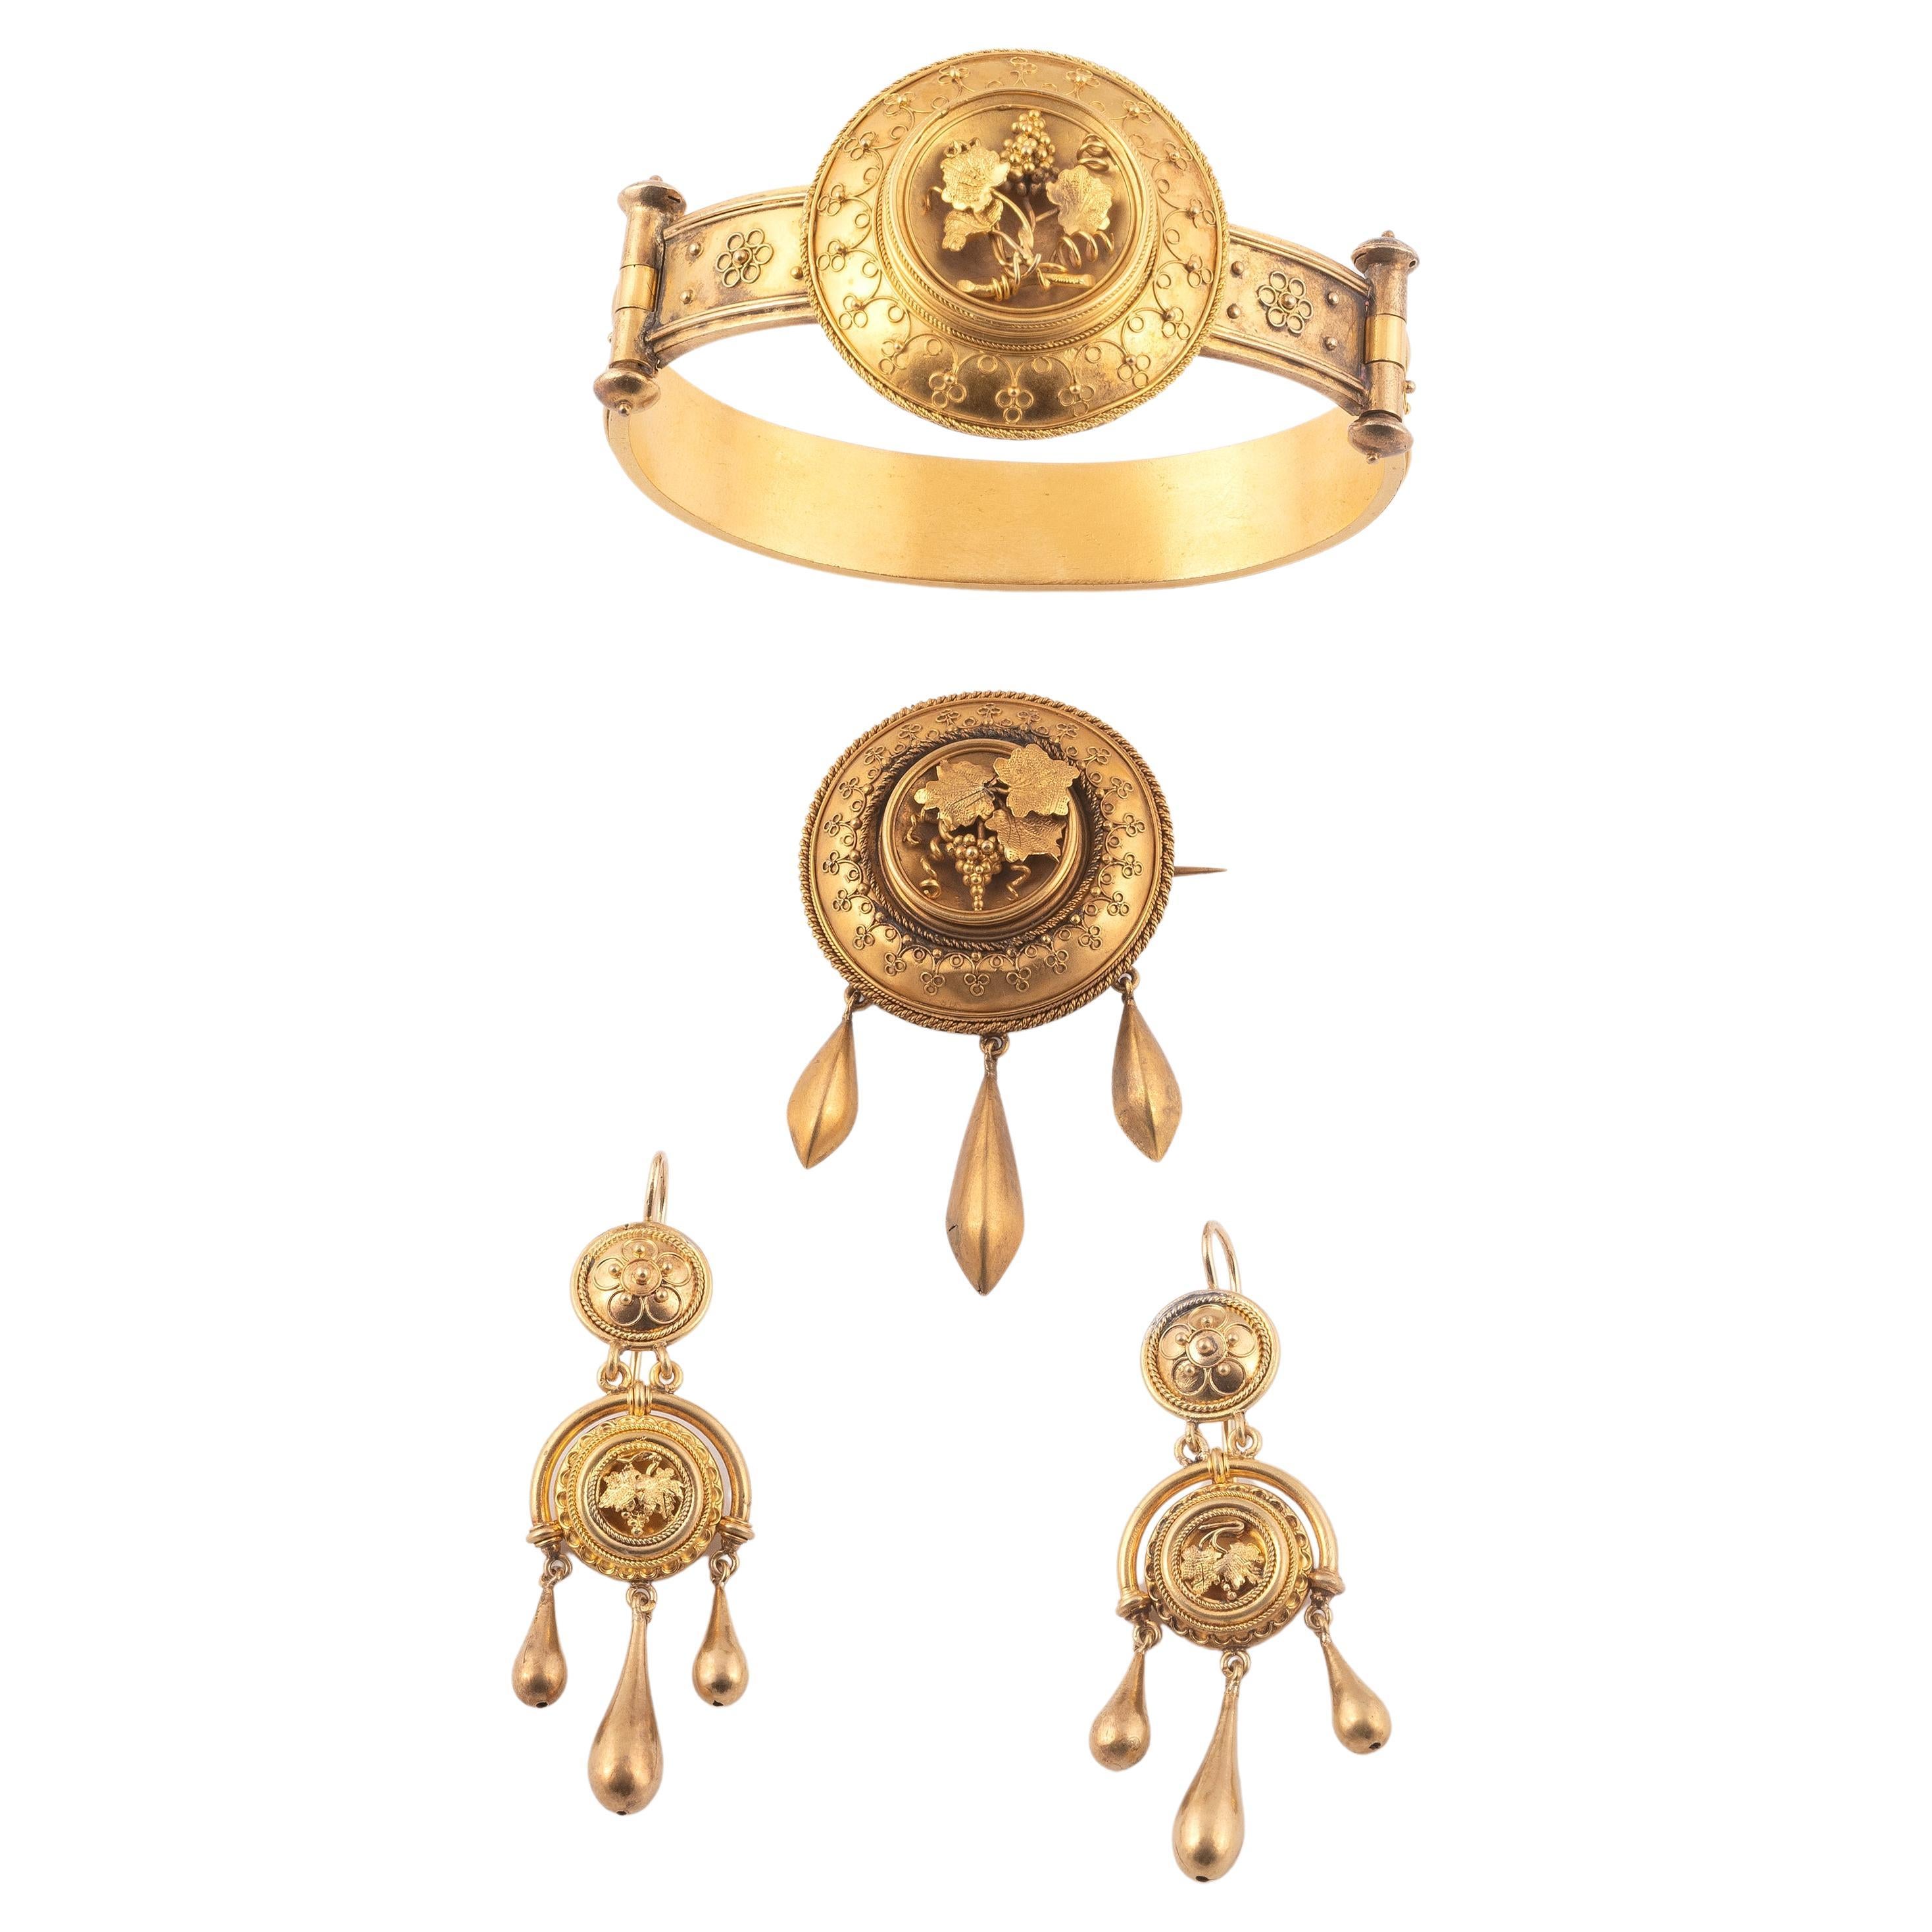 Gold Archaeological Revival Parure 19th Century For Sale